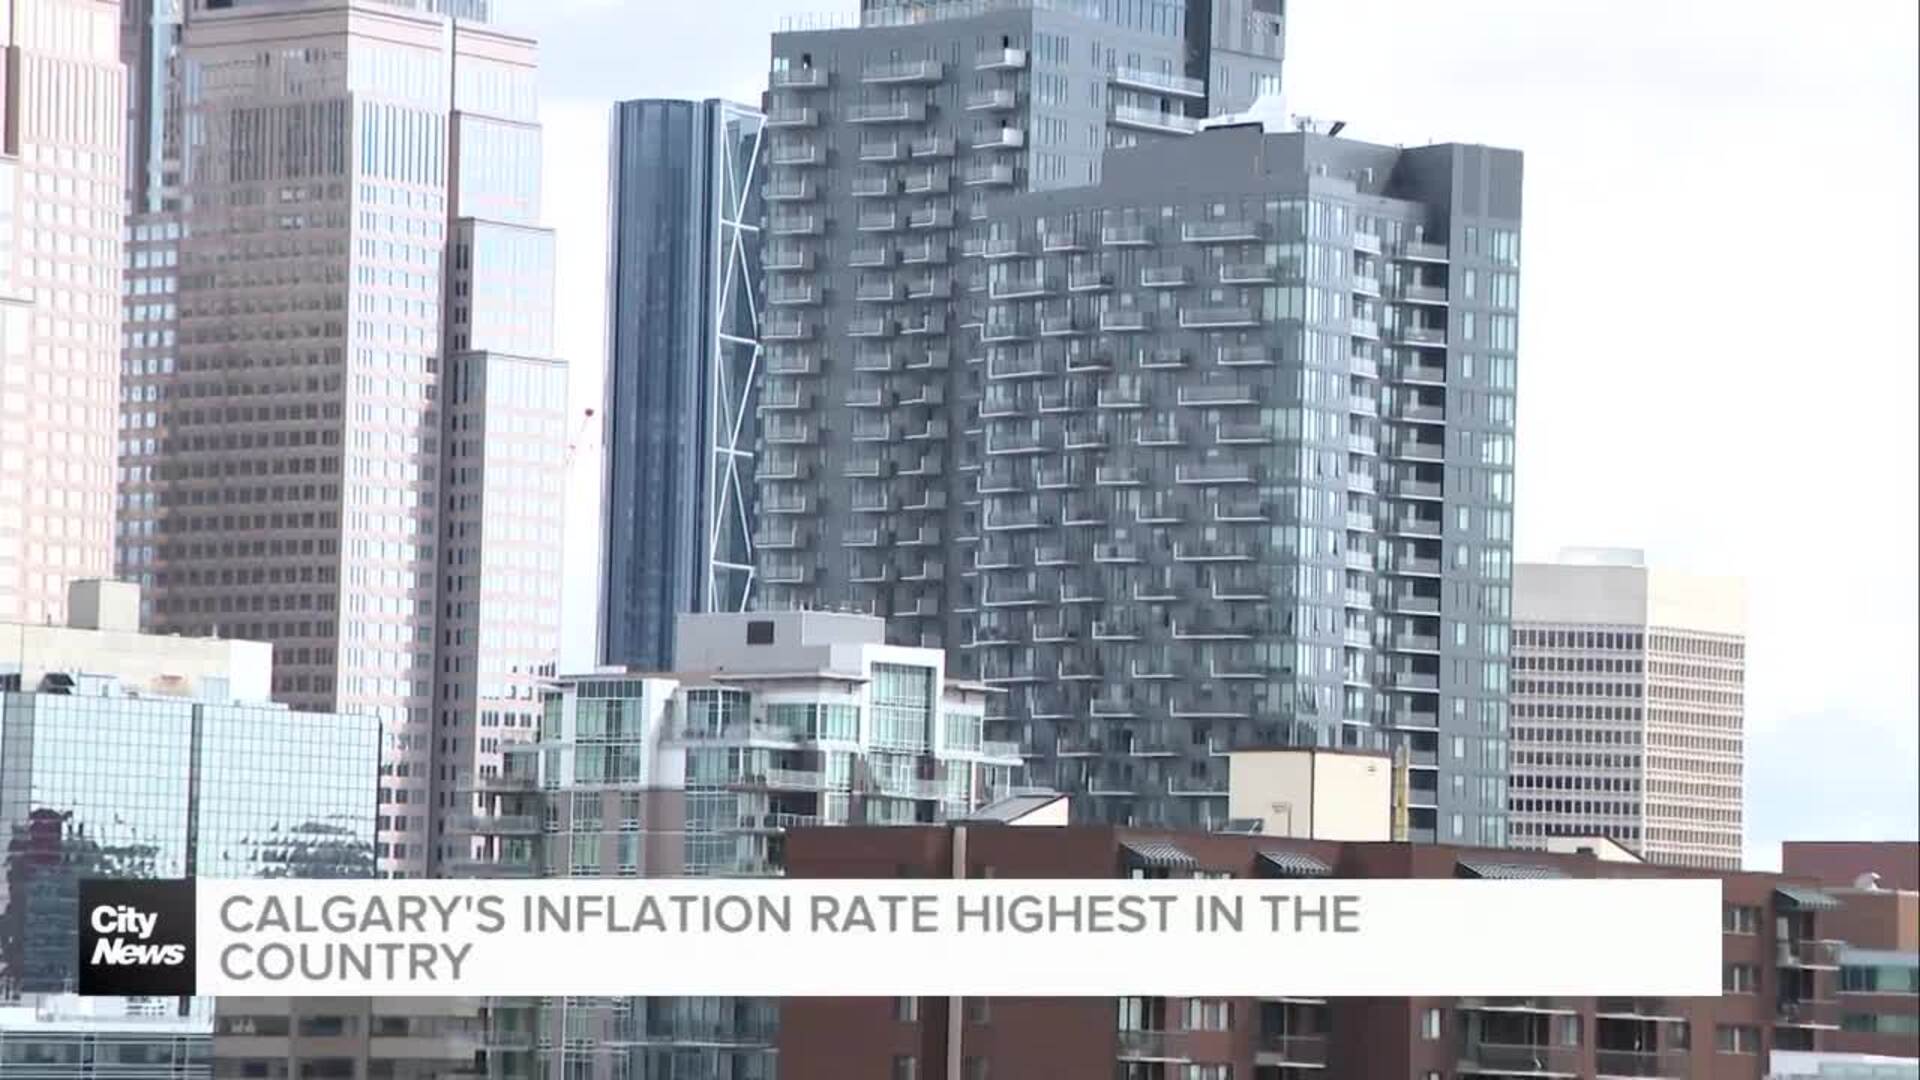 Calgary’s inflation rate highest in the country